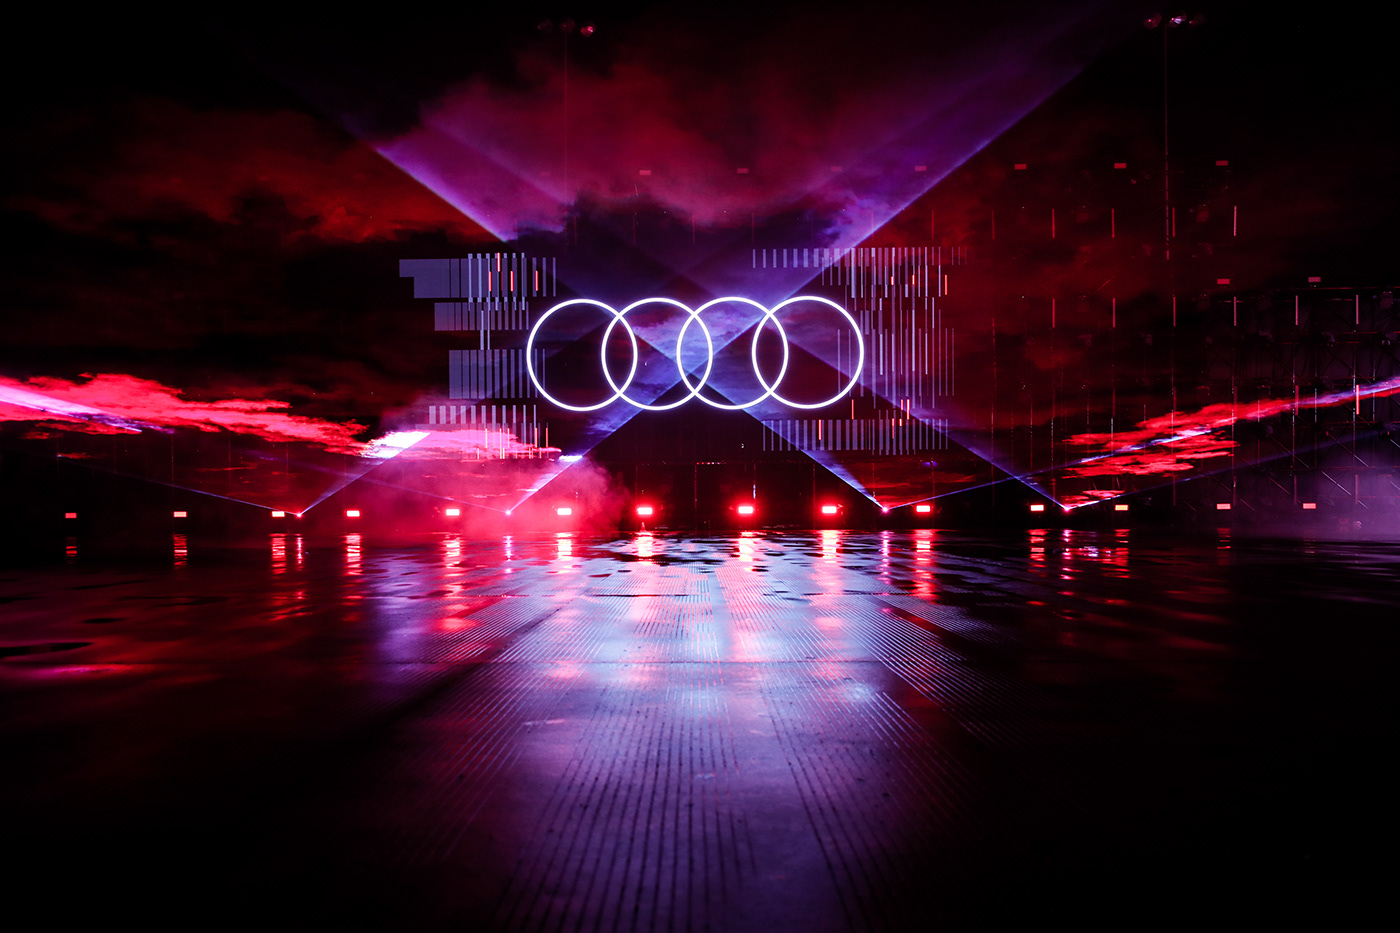 Audi audi sport rs art design Event launch Show Stage Stand